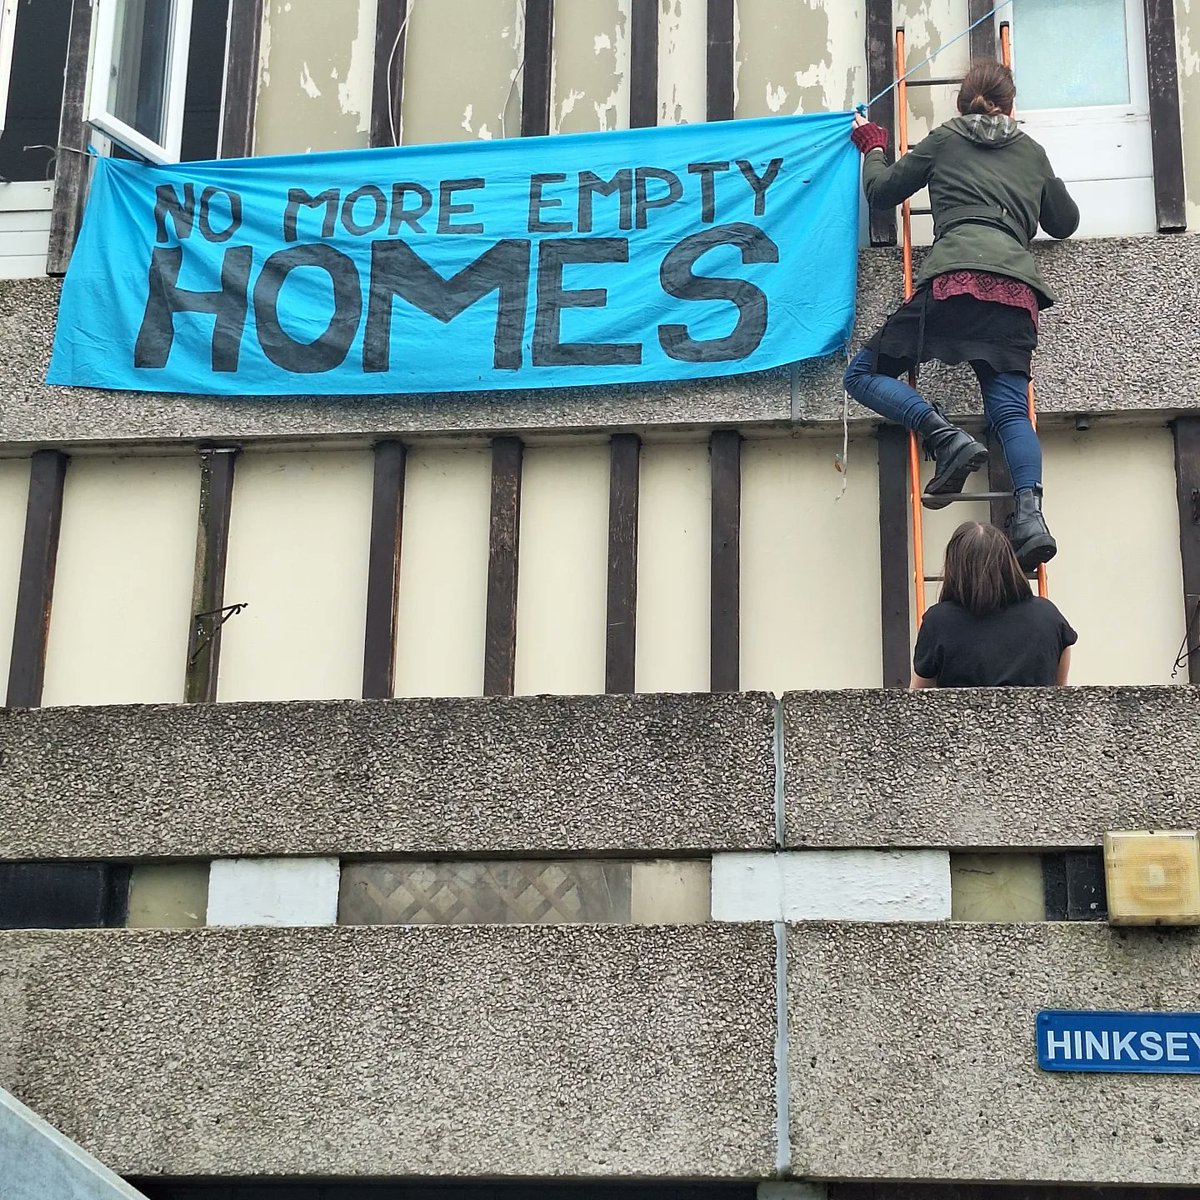 We are LIVE occupying one of the many empty homes on the Lesnes estate in protest against demolition and destruction of our community. We demand @PeabodyLDN #RefurbishDontDemolish #Fillemptyhomes Join Us! 24 Hinksey Path SE2 9TB